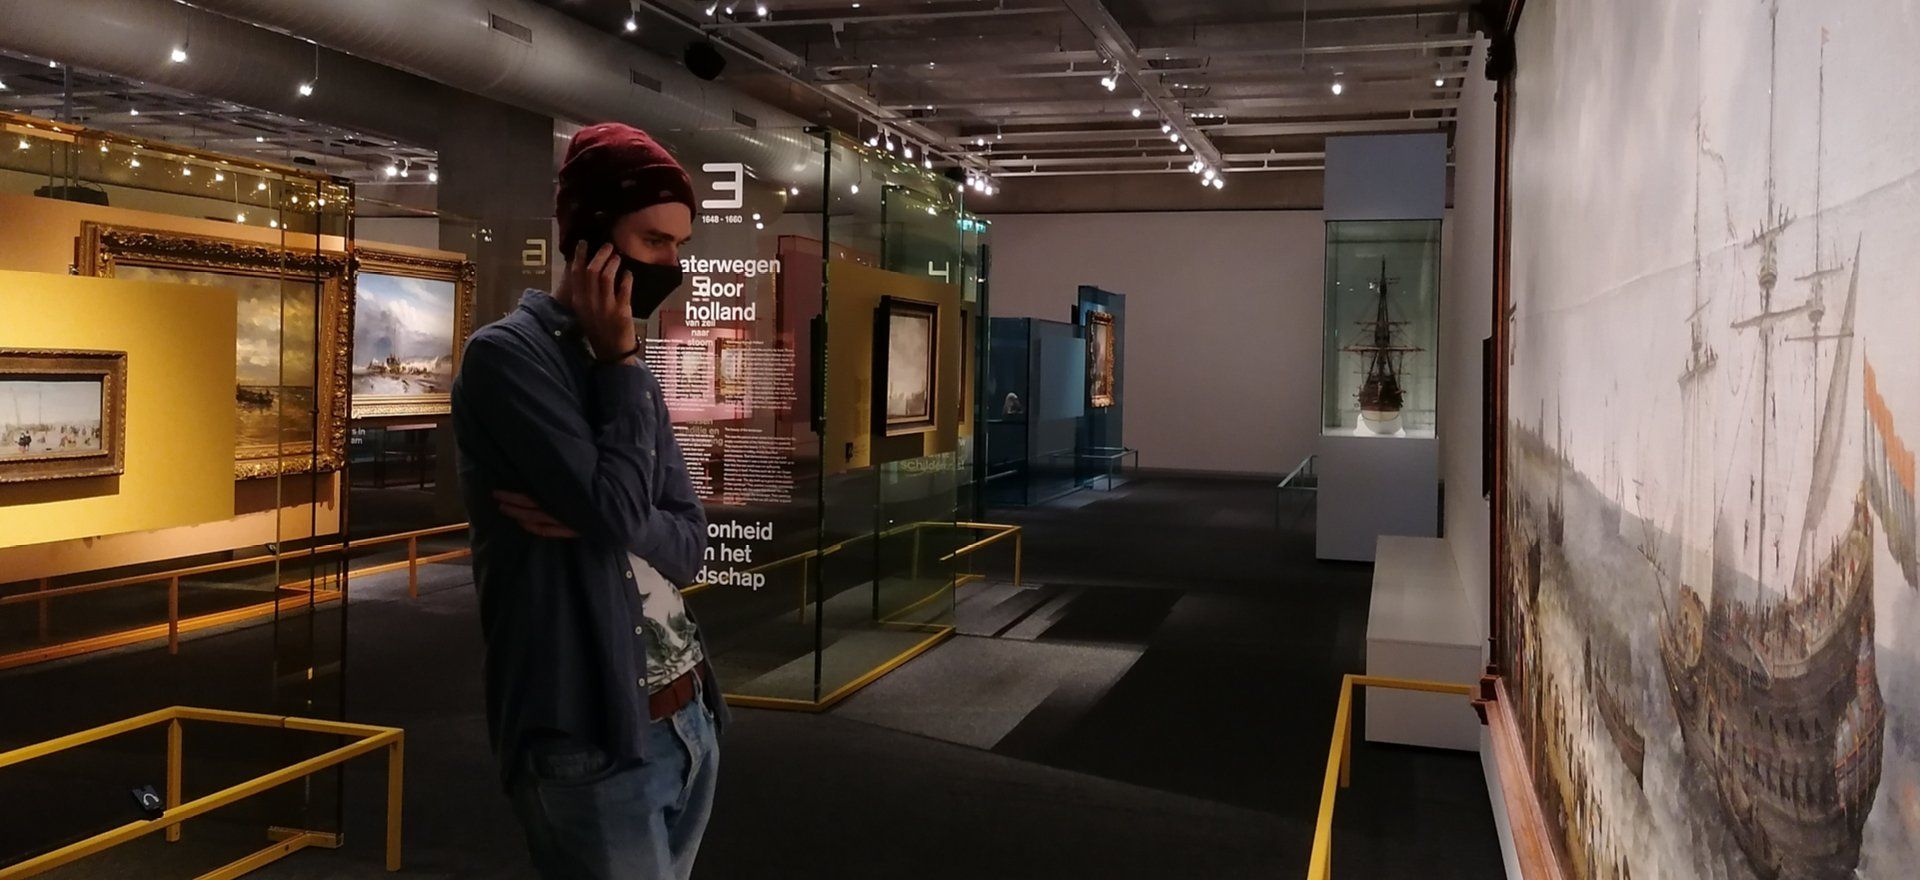 A masked person during the pandemic listening to a Podcatcher in  empty looking museum room with several artworks displayed